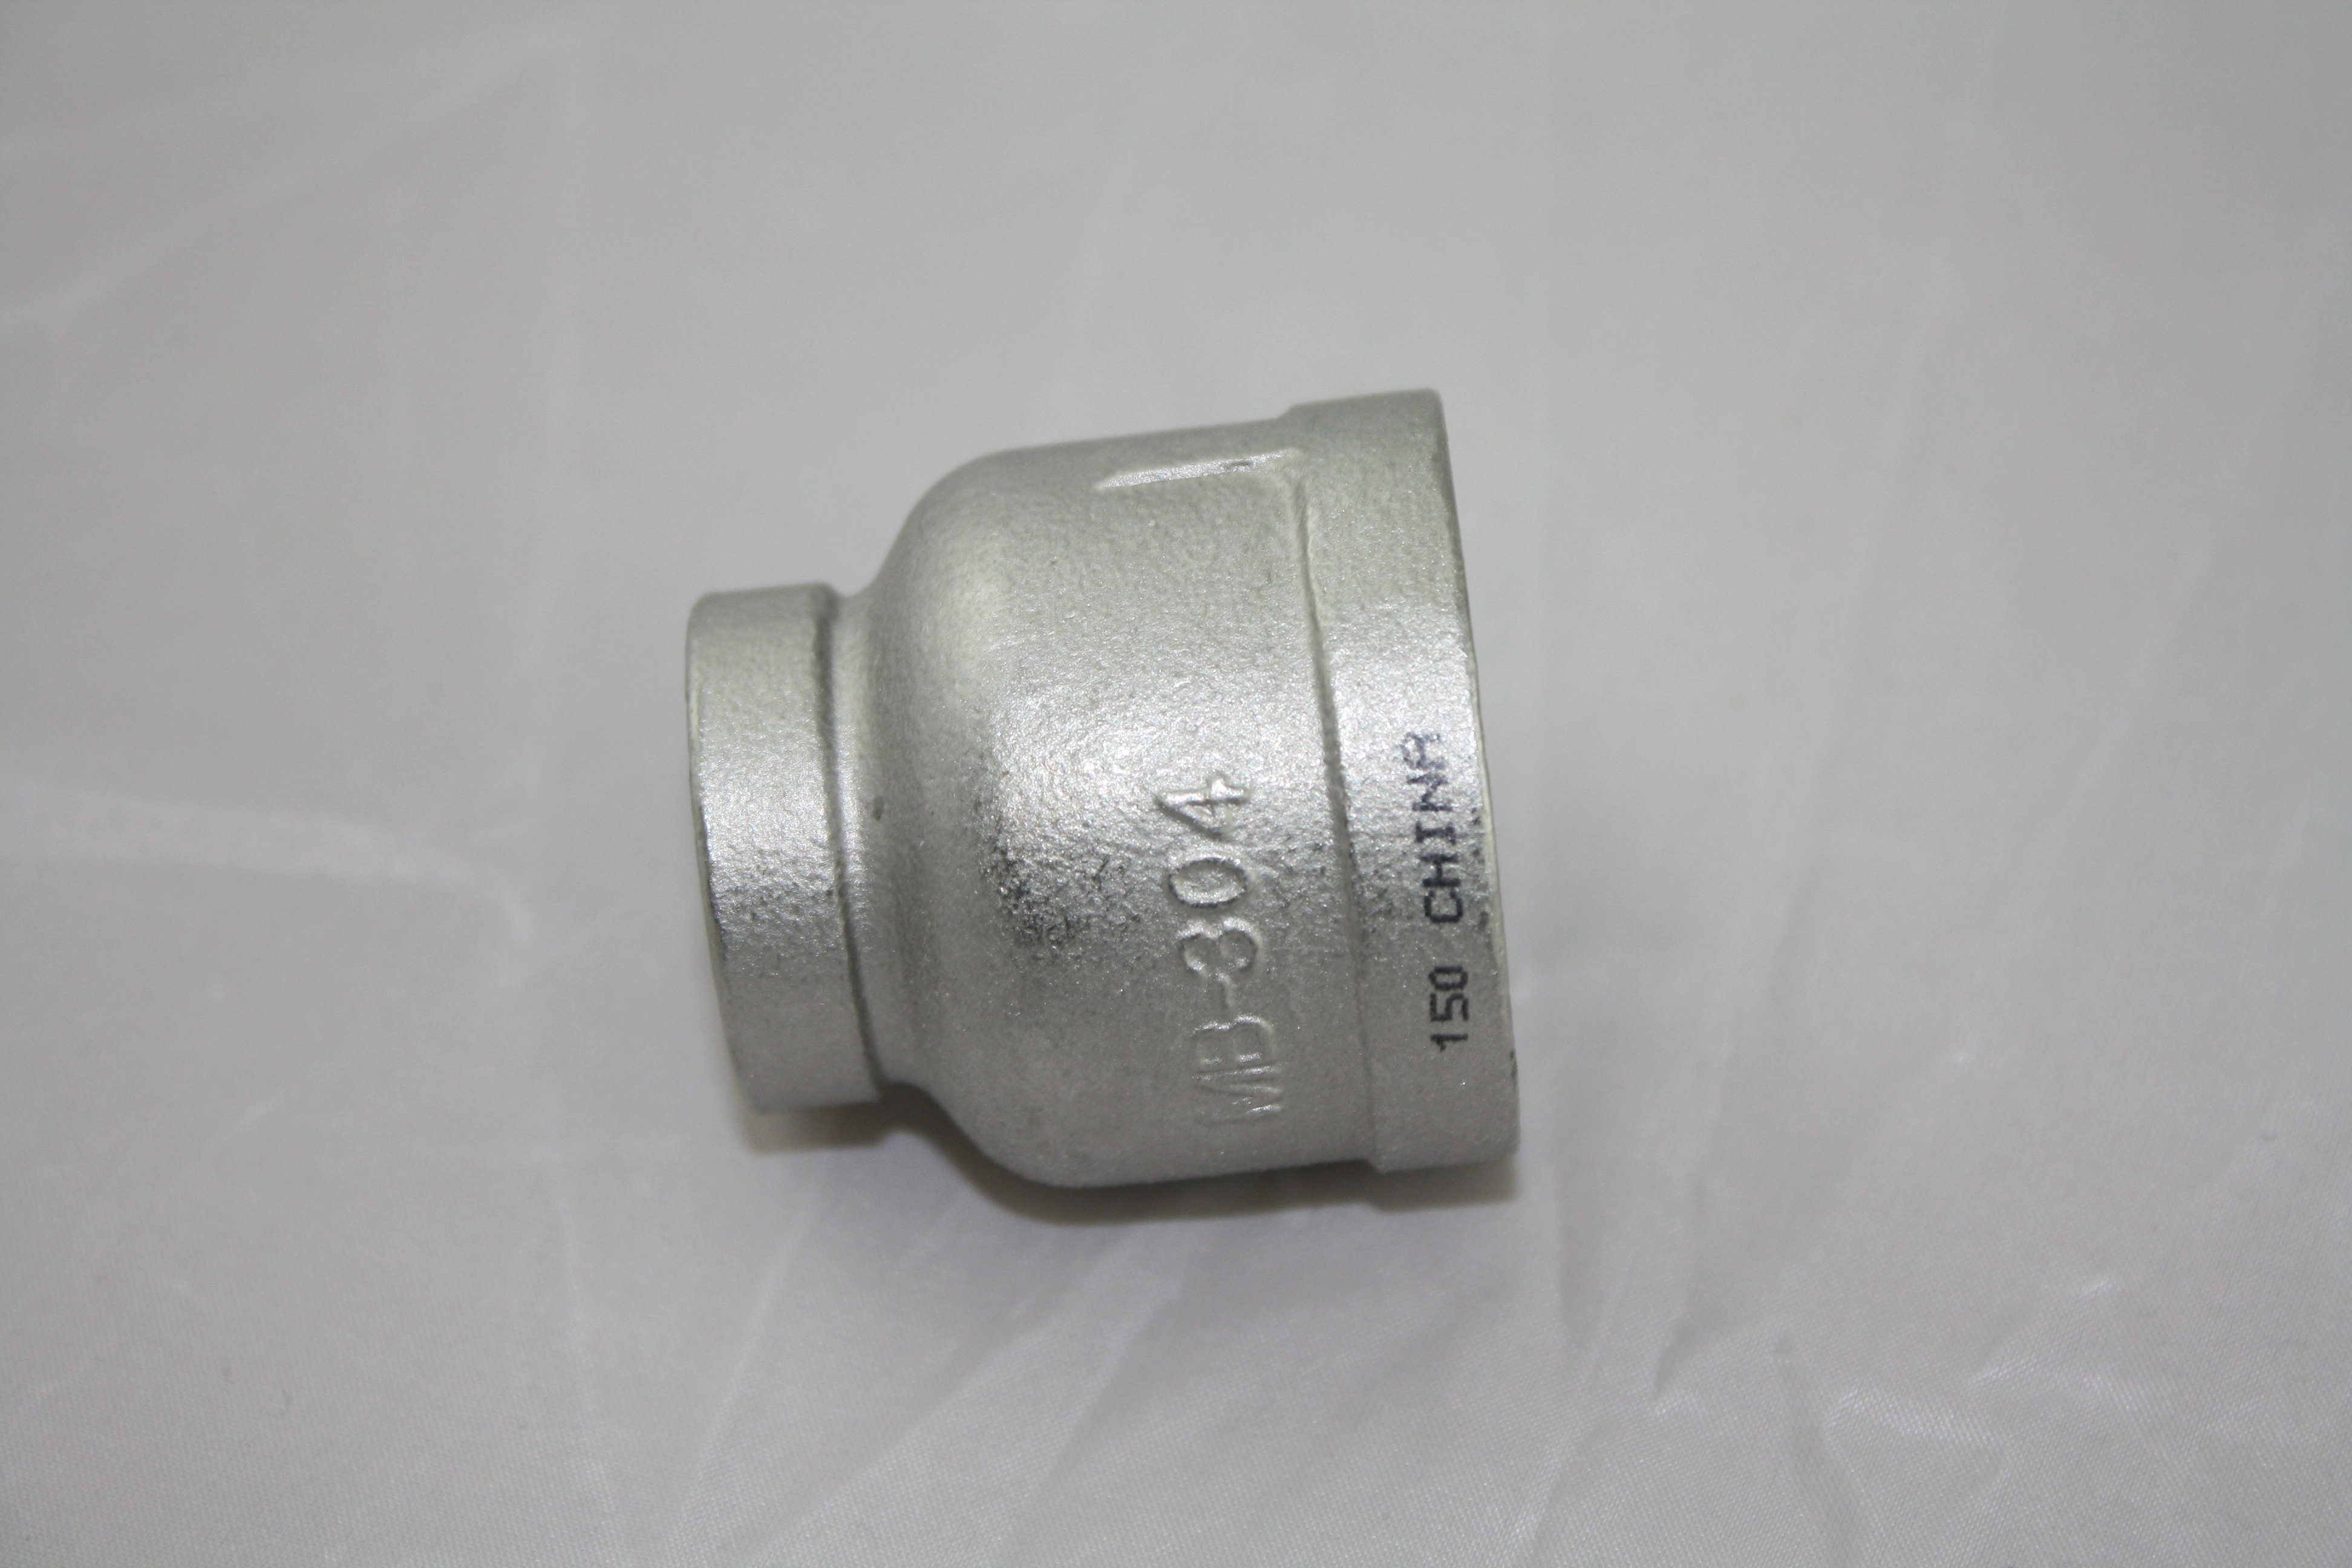 1" x 1/2" Reducer Coupling Stainless Steel 304-0